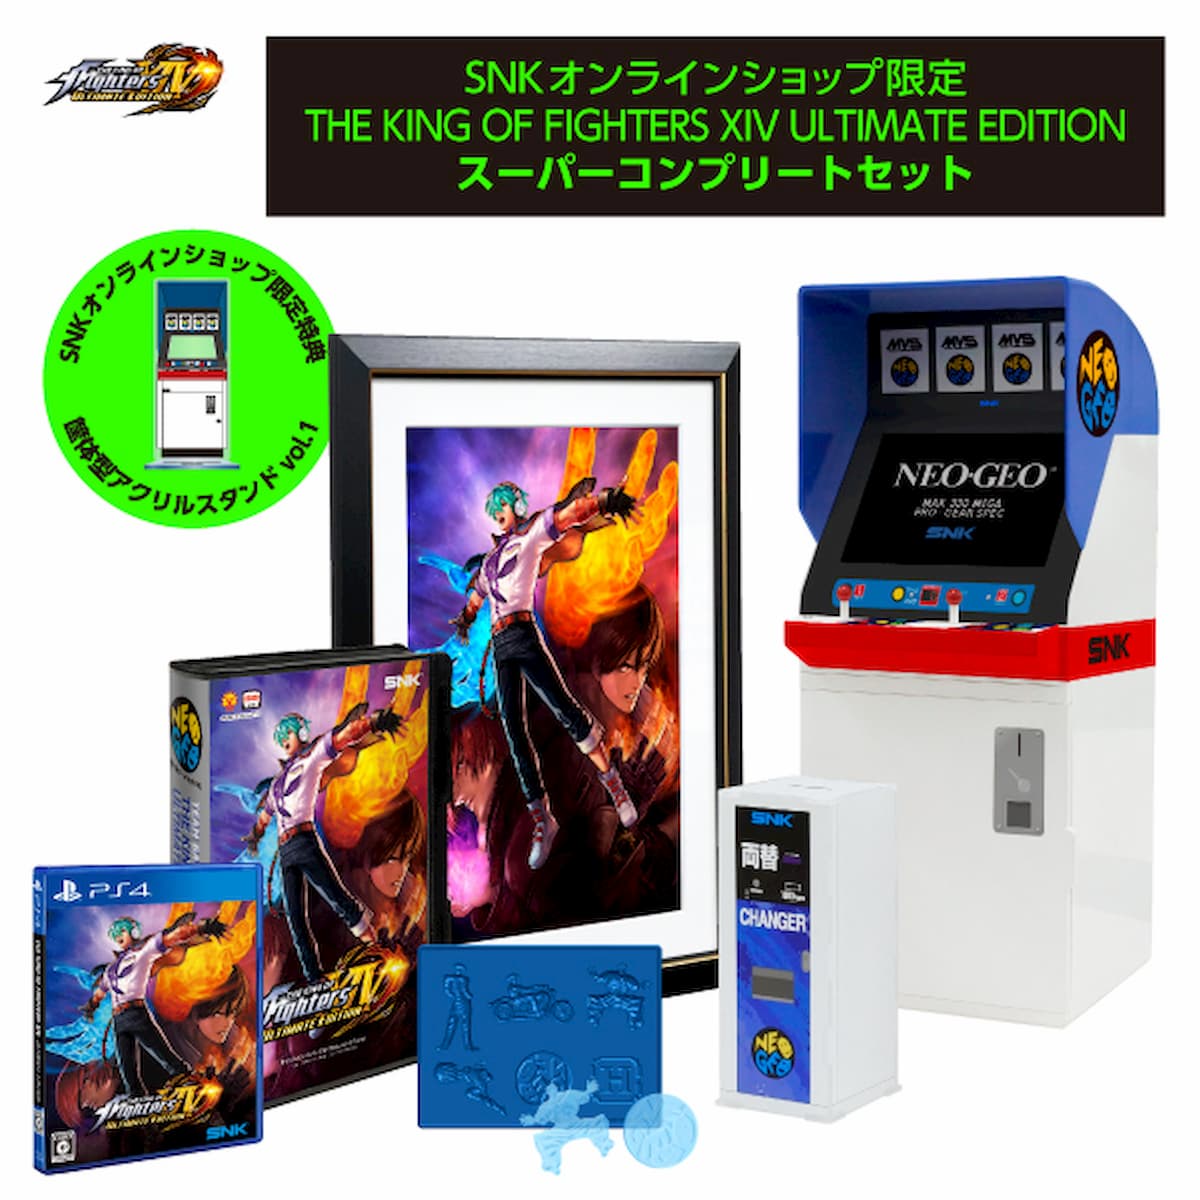 THE KING OF FIGHTERS XIV ULTIMATE EDITION スーパーコンプリートセット - PS4